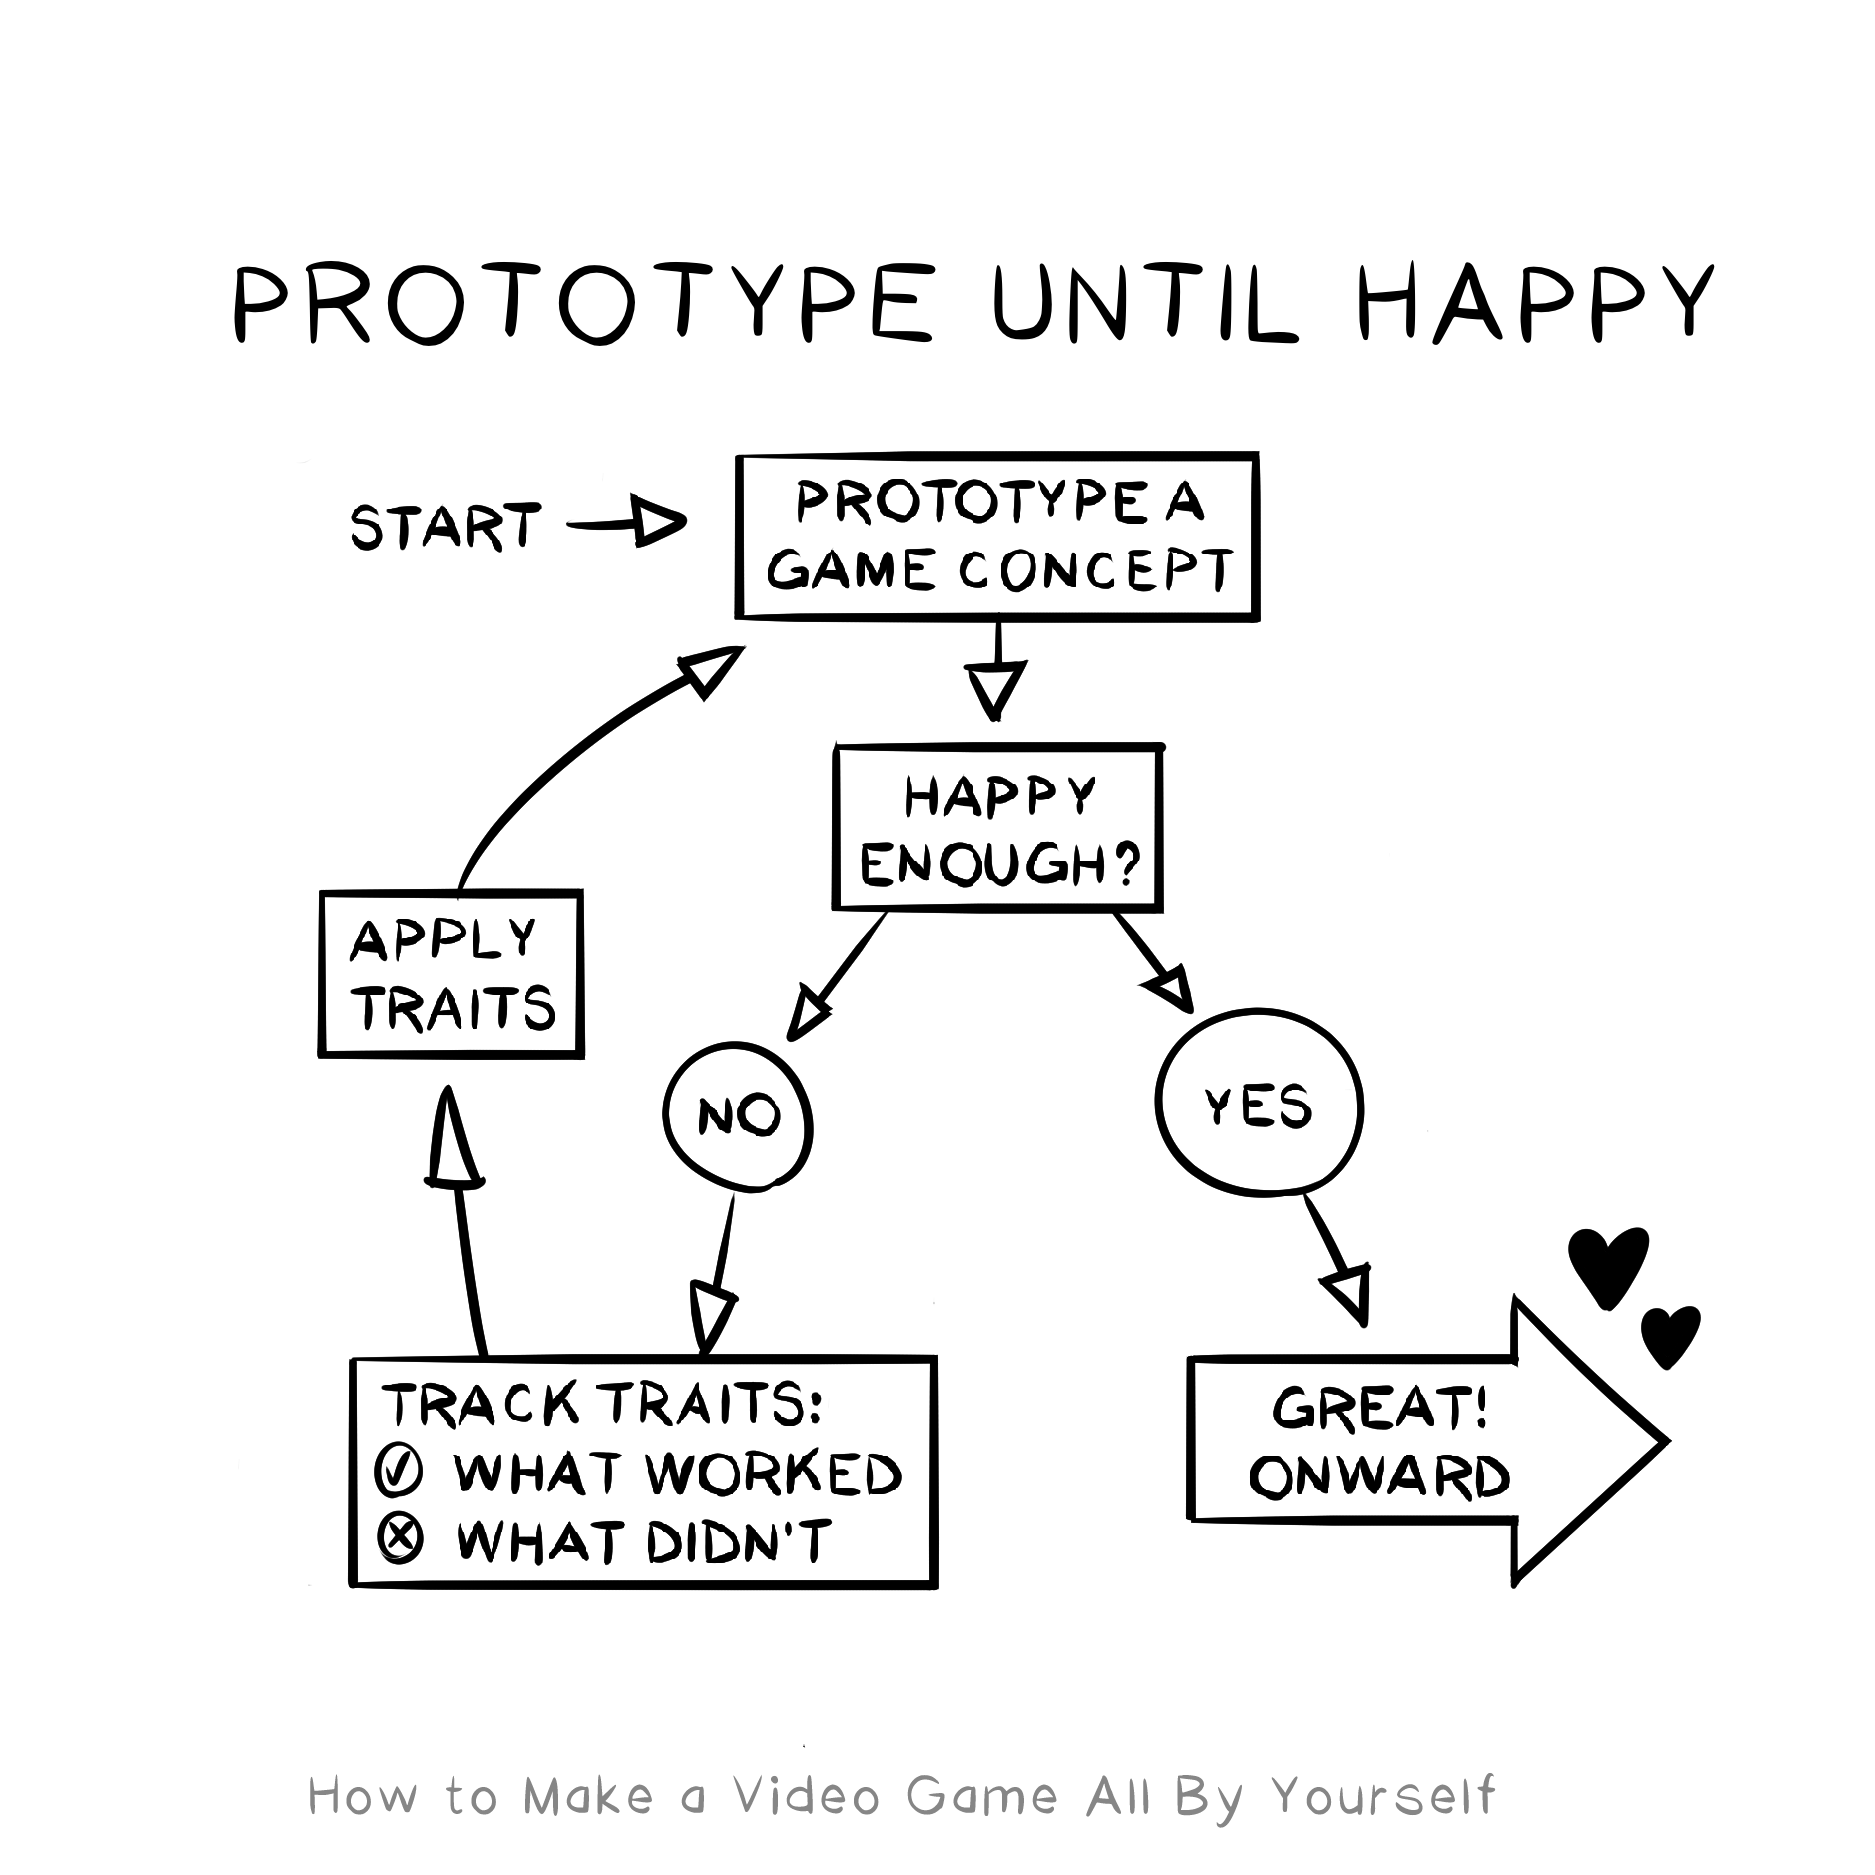 Prototype Until Happy: track what worked, what didn't, and move on to the next one!